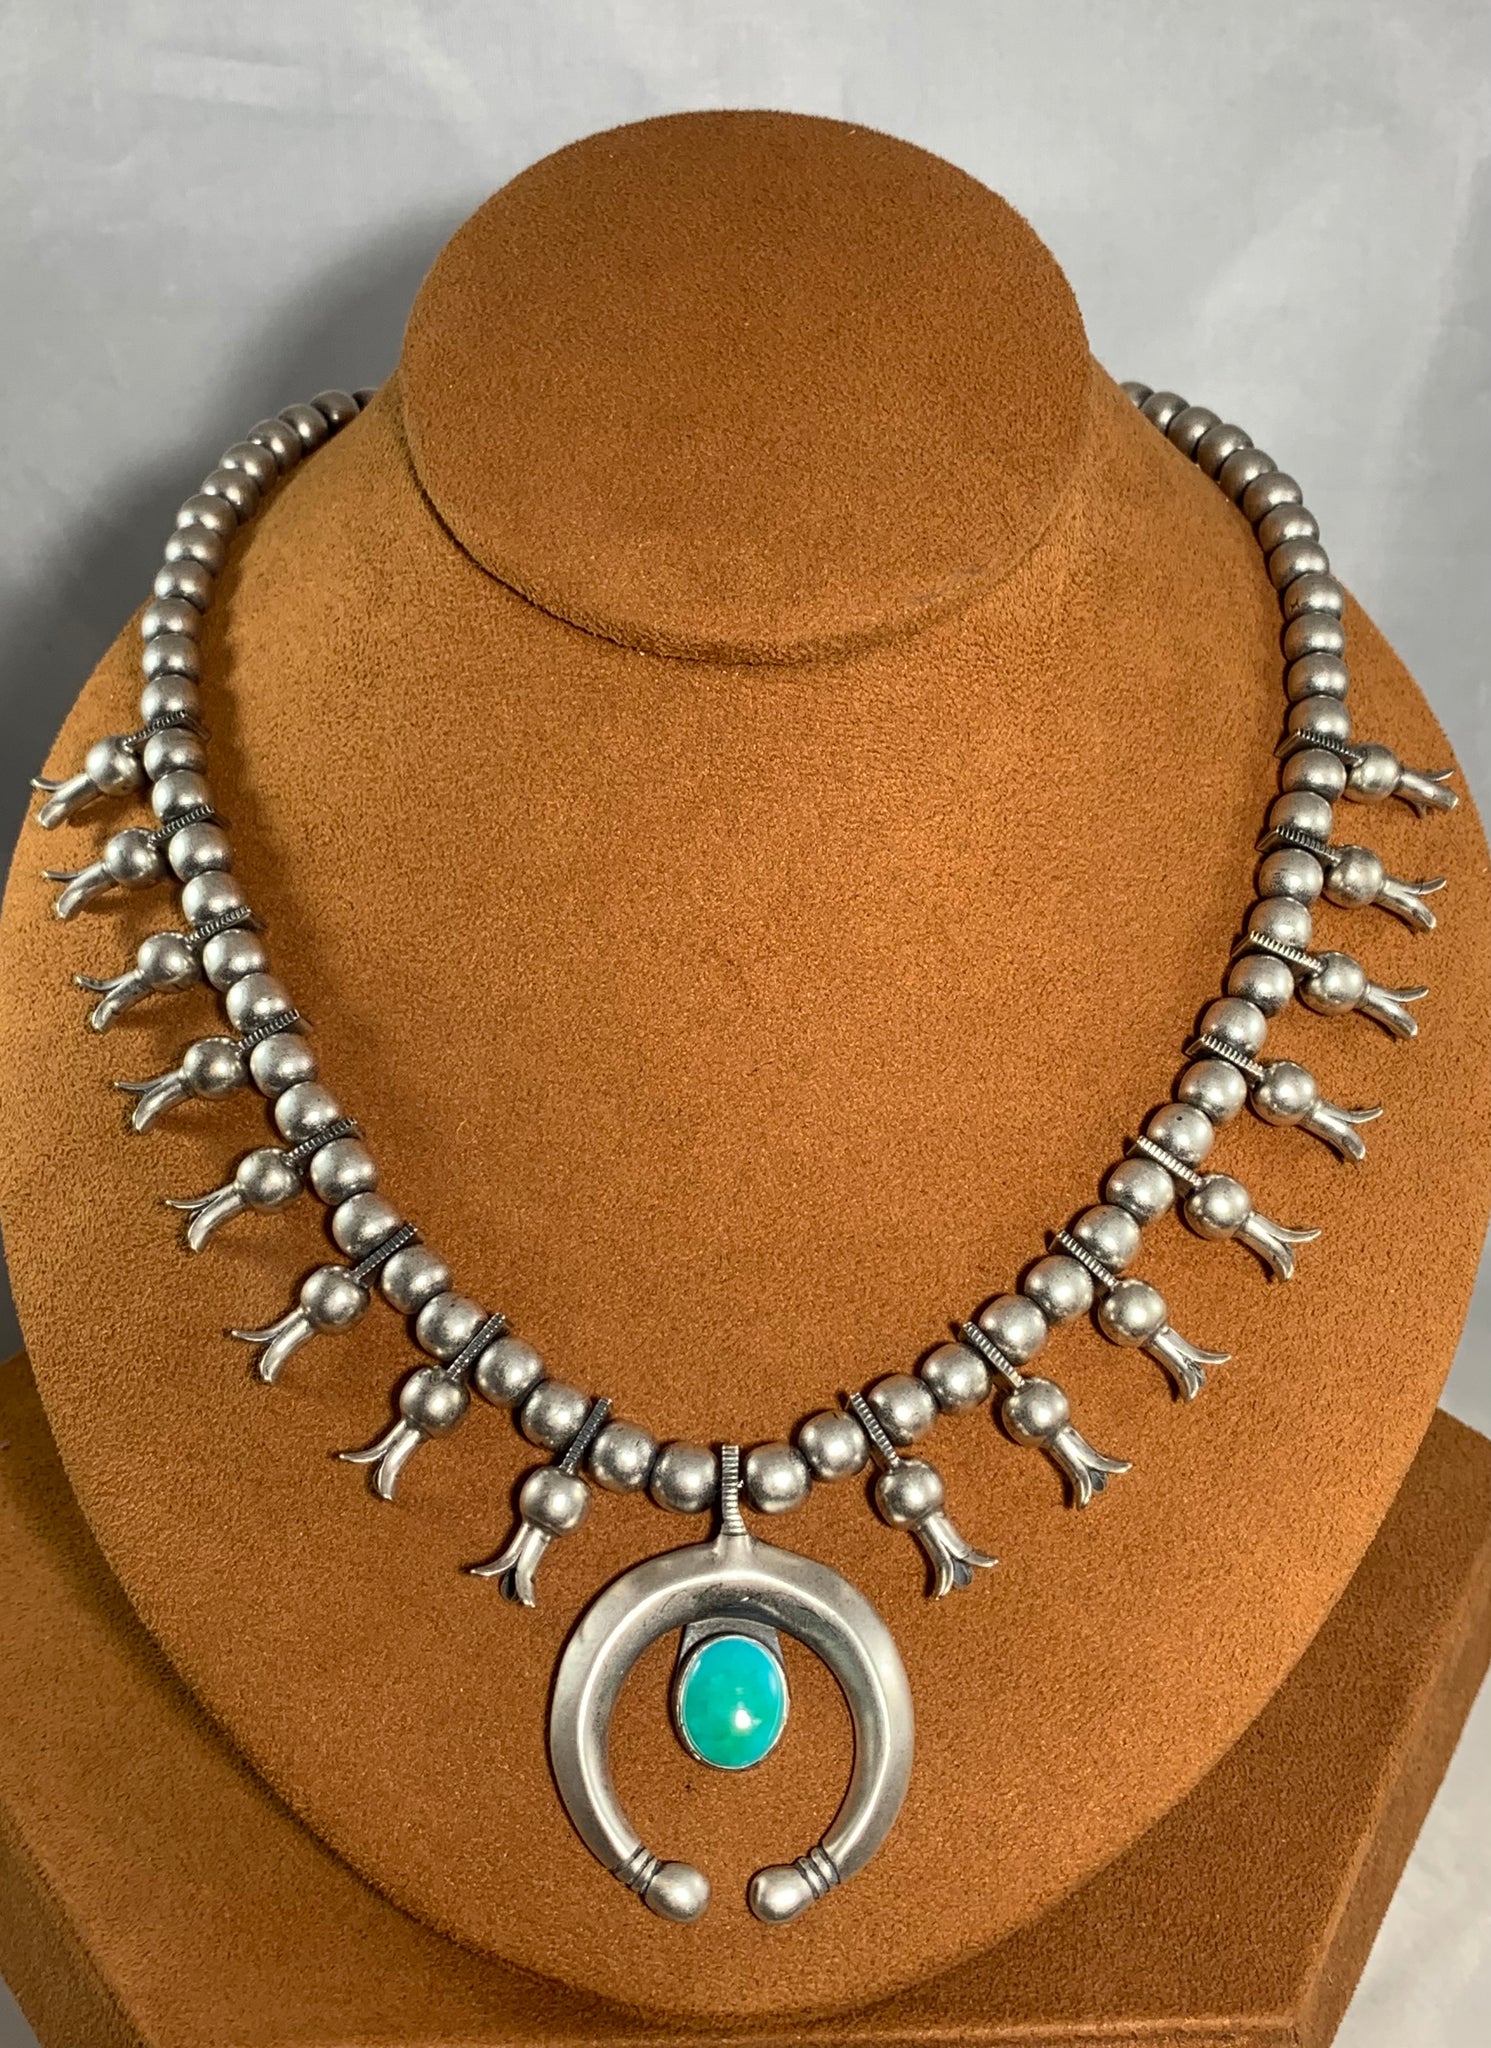 Mini-Squash with Turquoise by Don Lucas